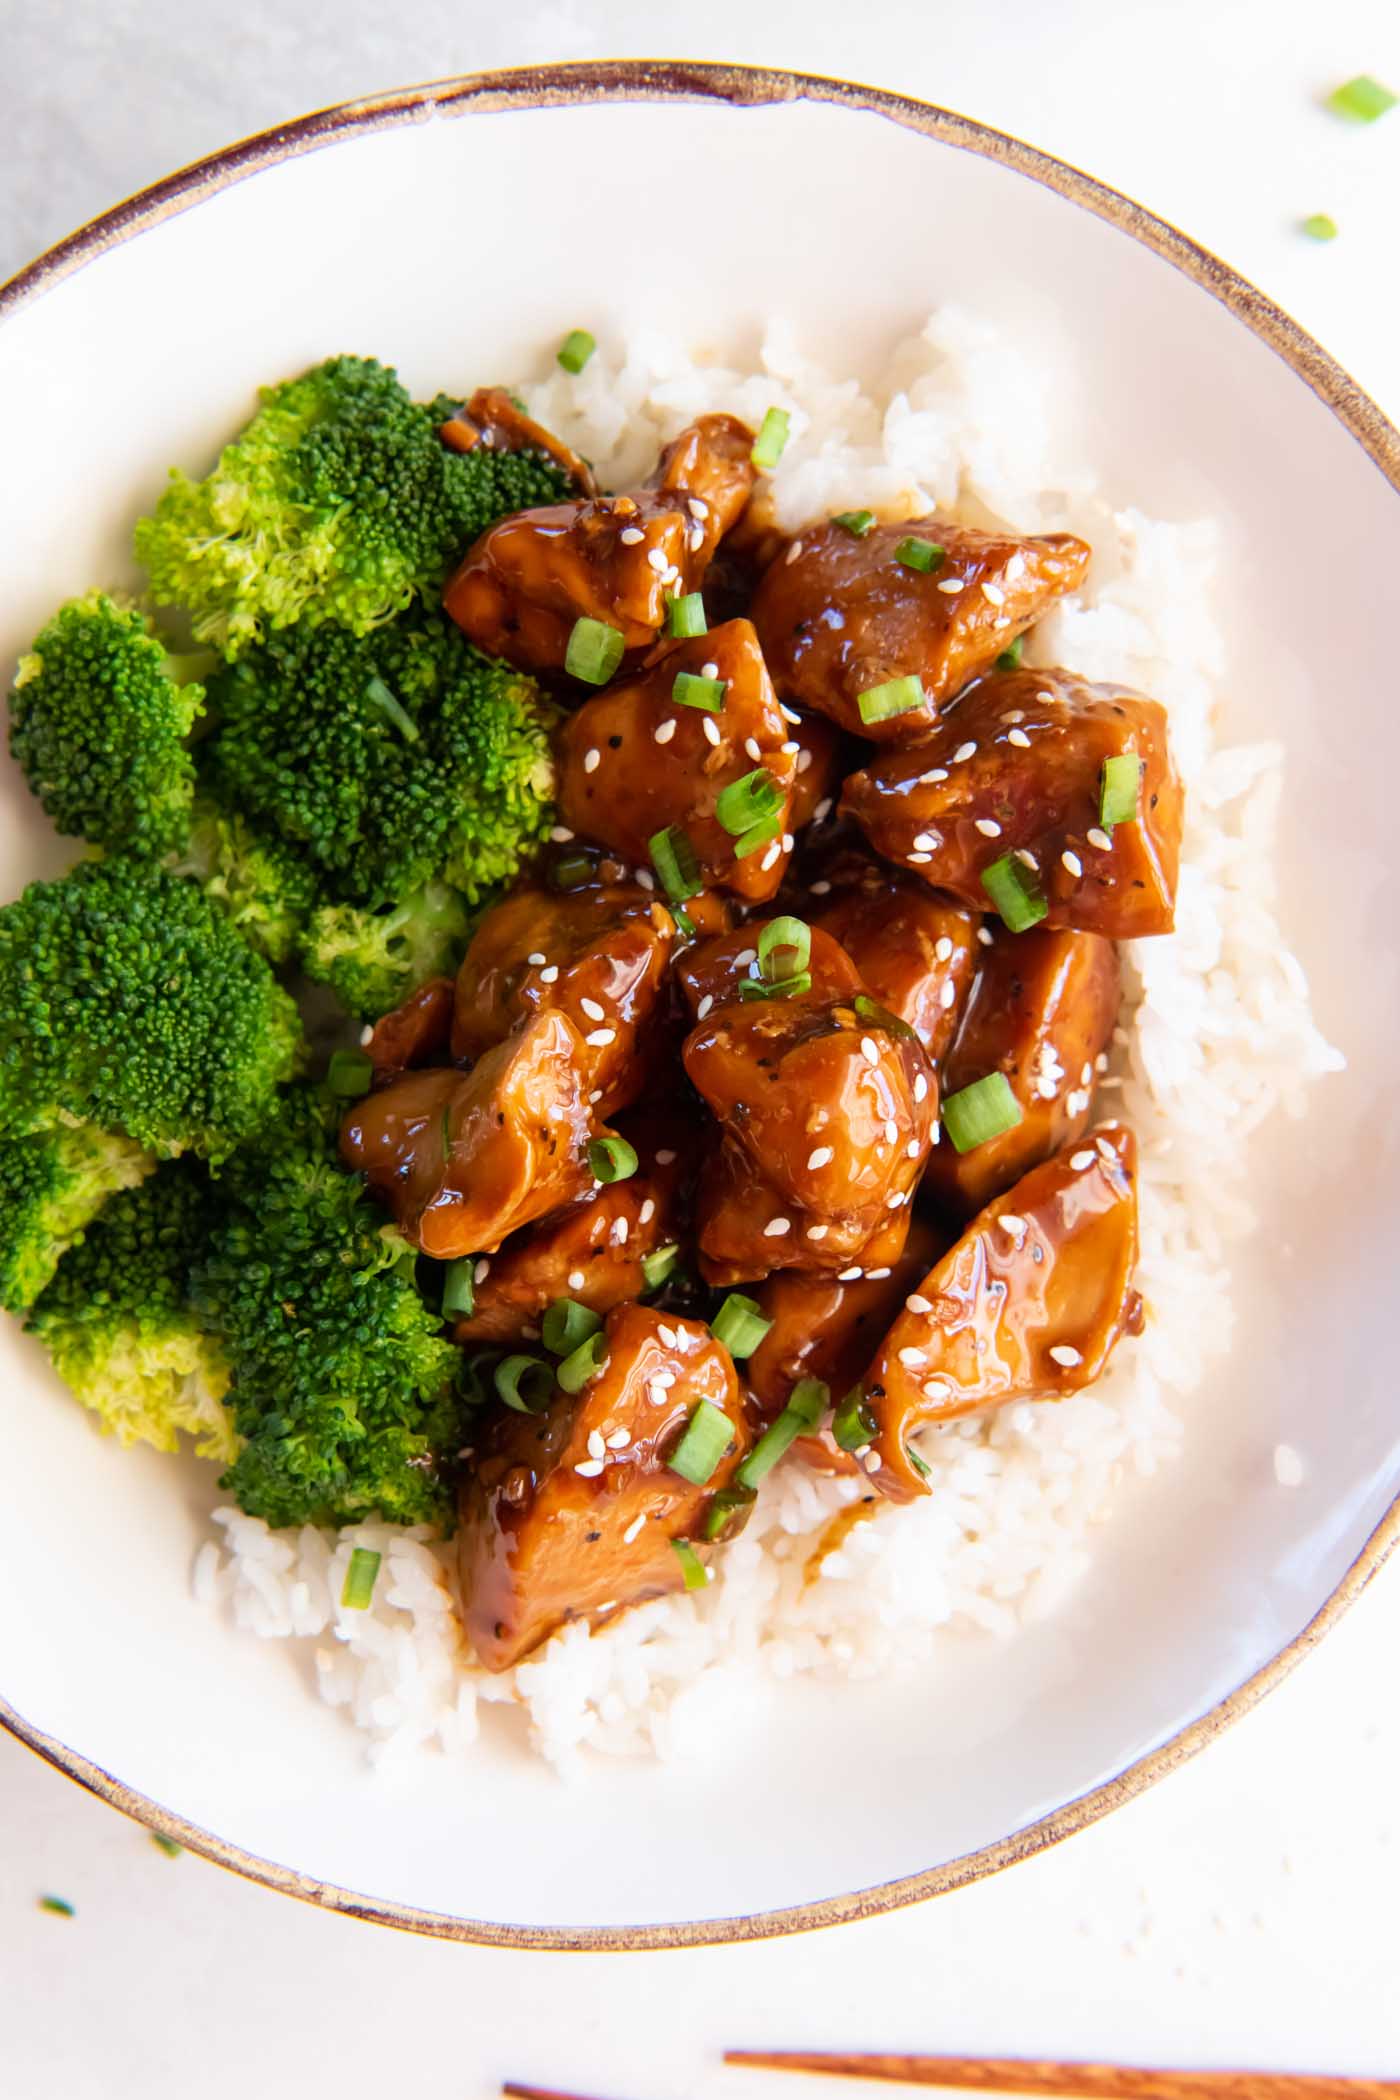 Teriyaki chicken plated with white rice, broccoli, sesame seeds and chopped green onions.